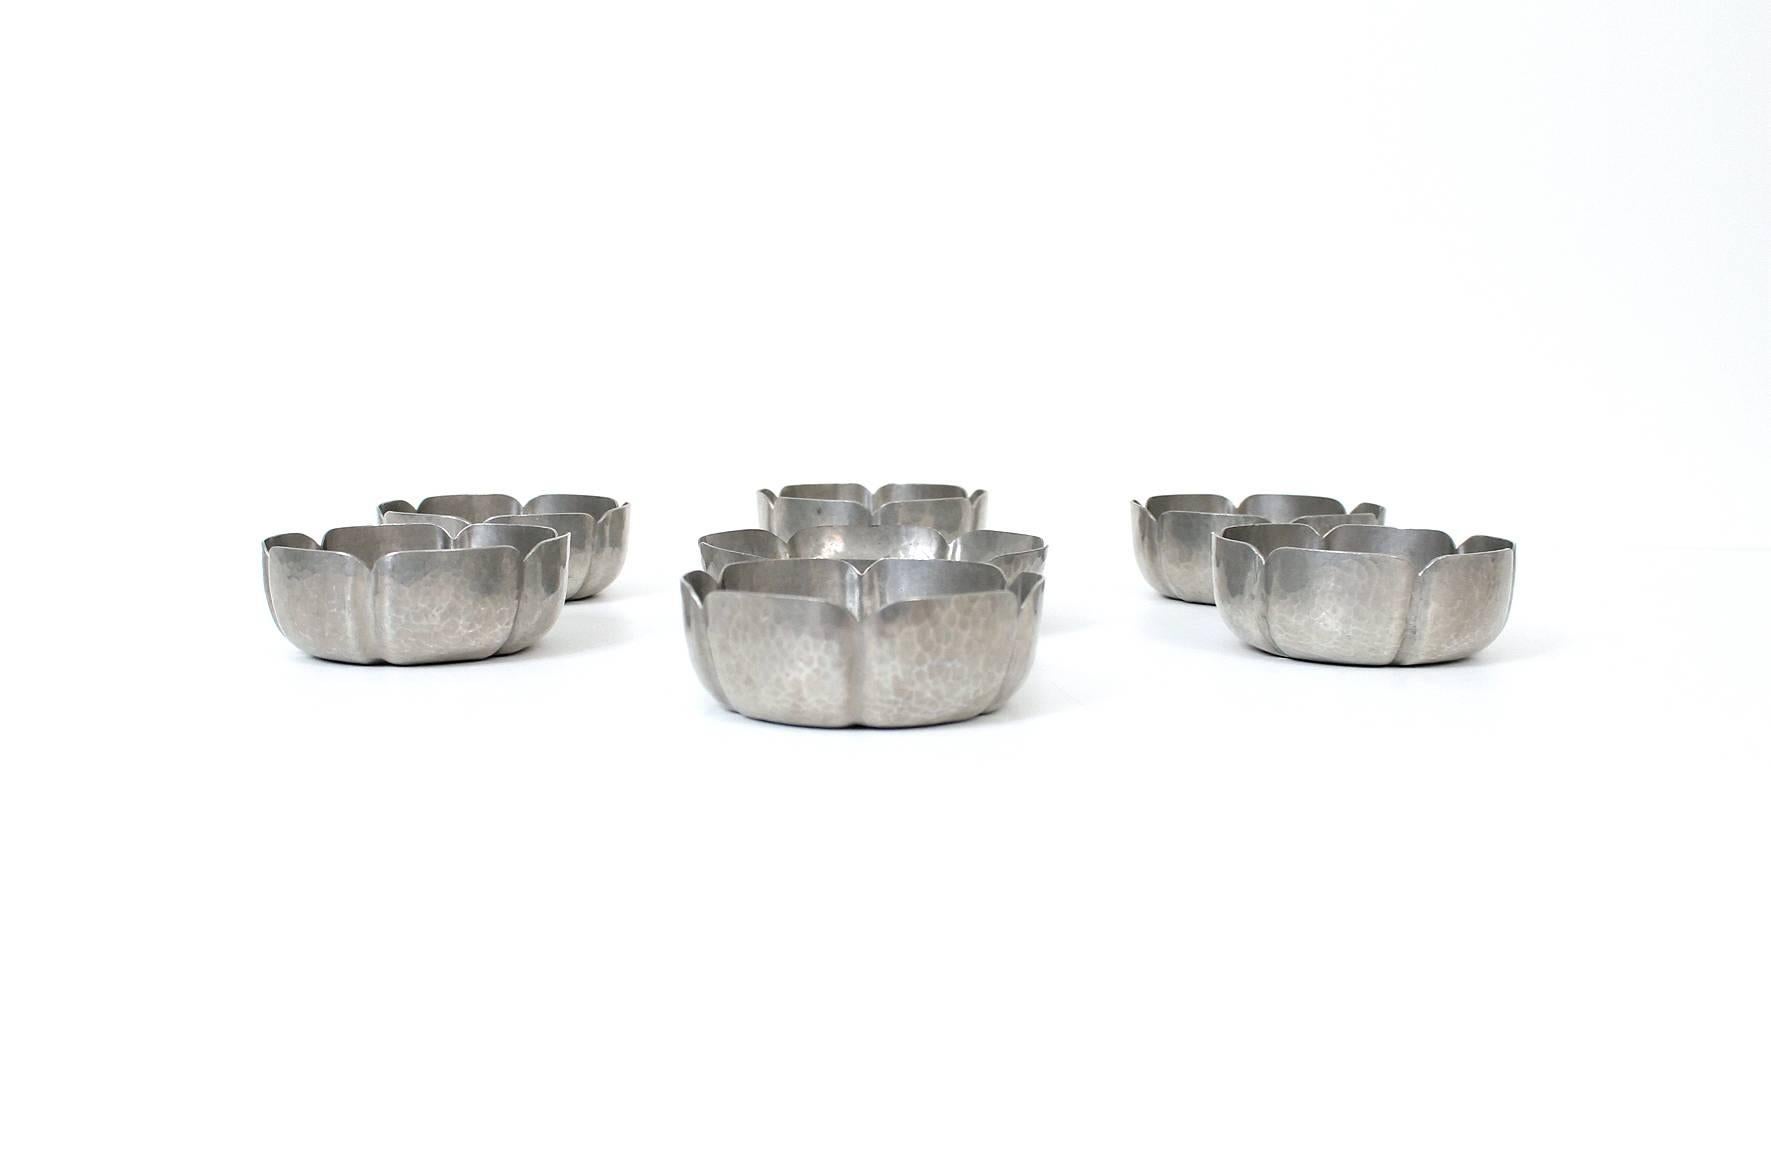 Boston school Arts & Crafts pewter bowl serving set by George Gebelein. Hand hammered floriform design. Signed with the impressed Gebelein mark to the underside. Dimensions below for smaller bowls. Larger bowl dimensions: H: 1.5